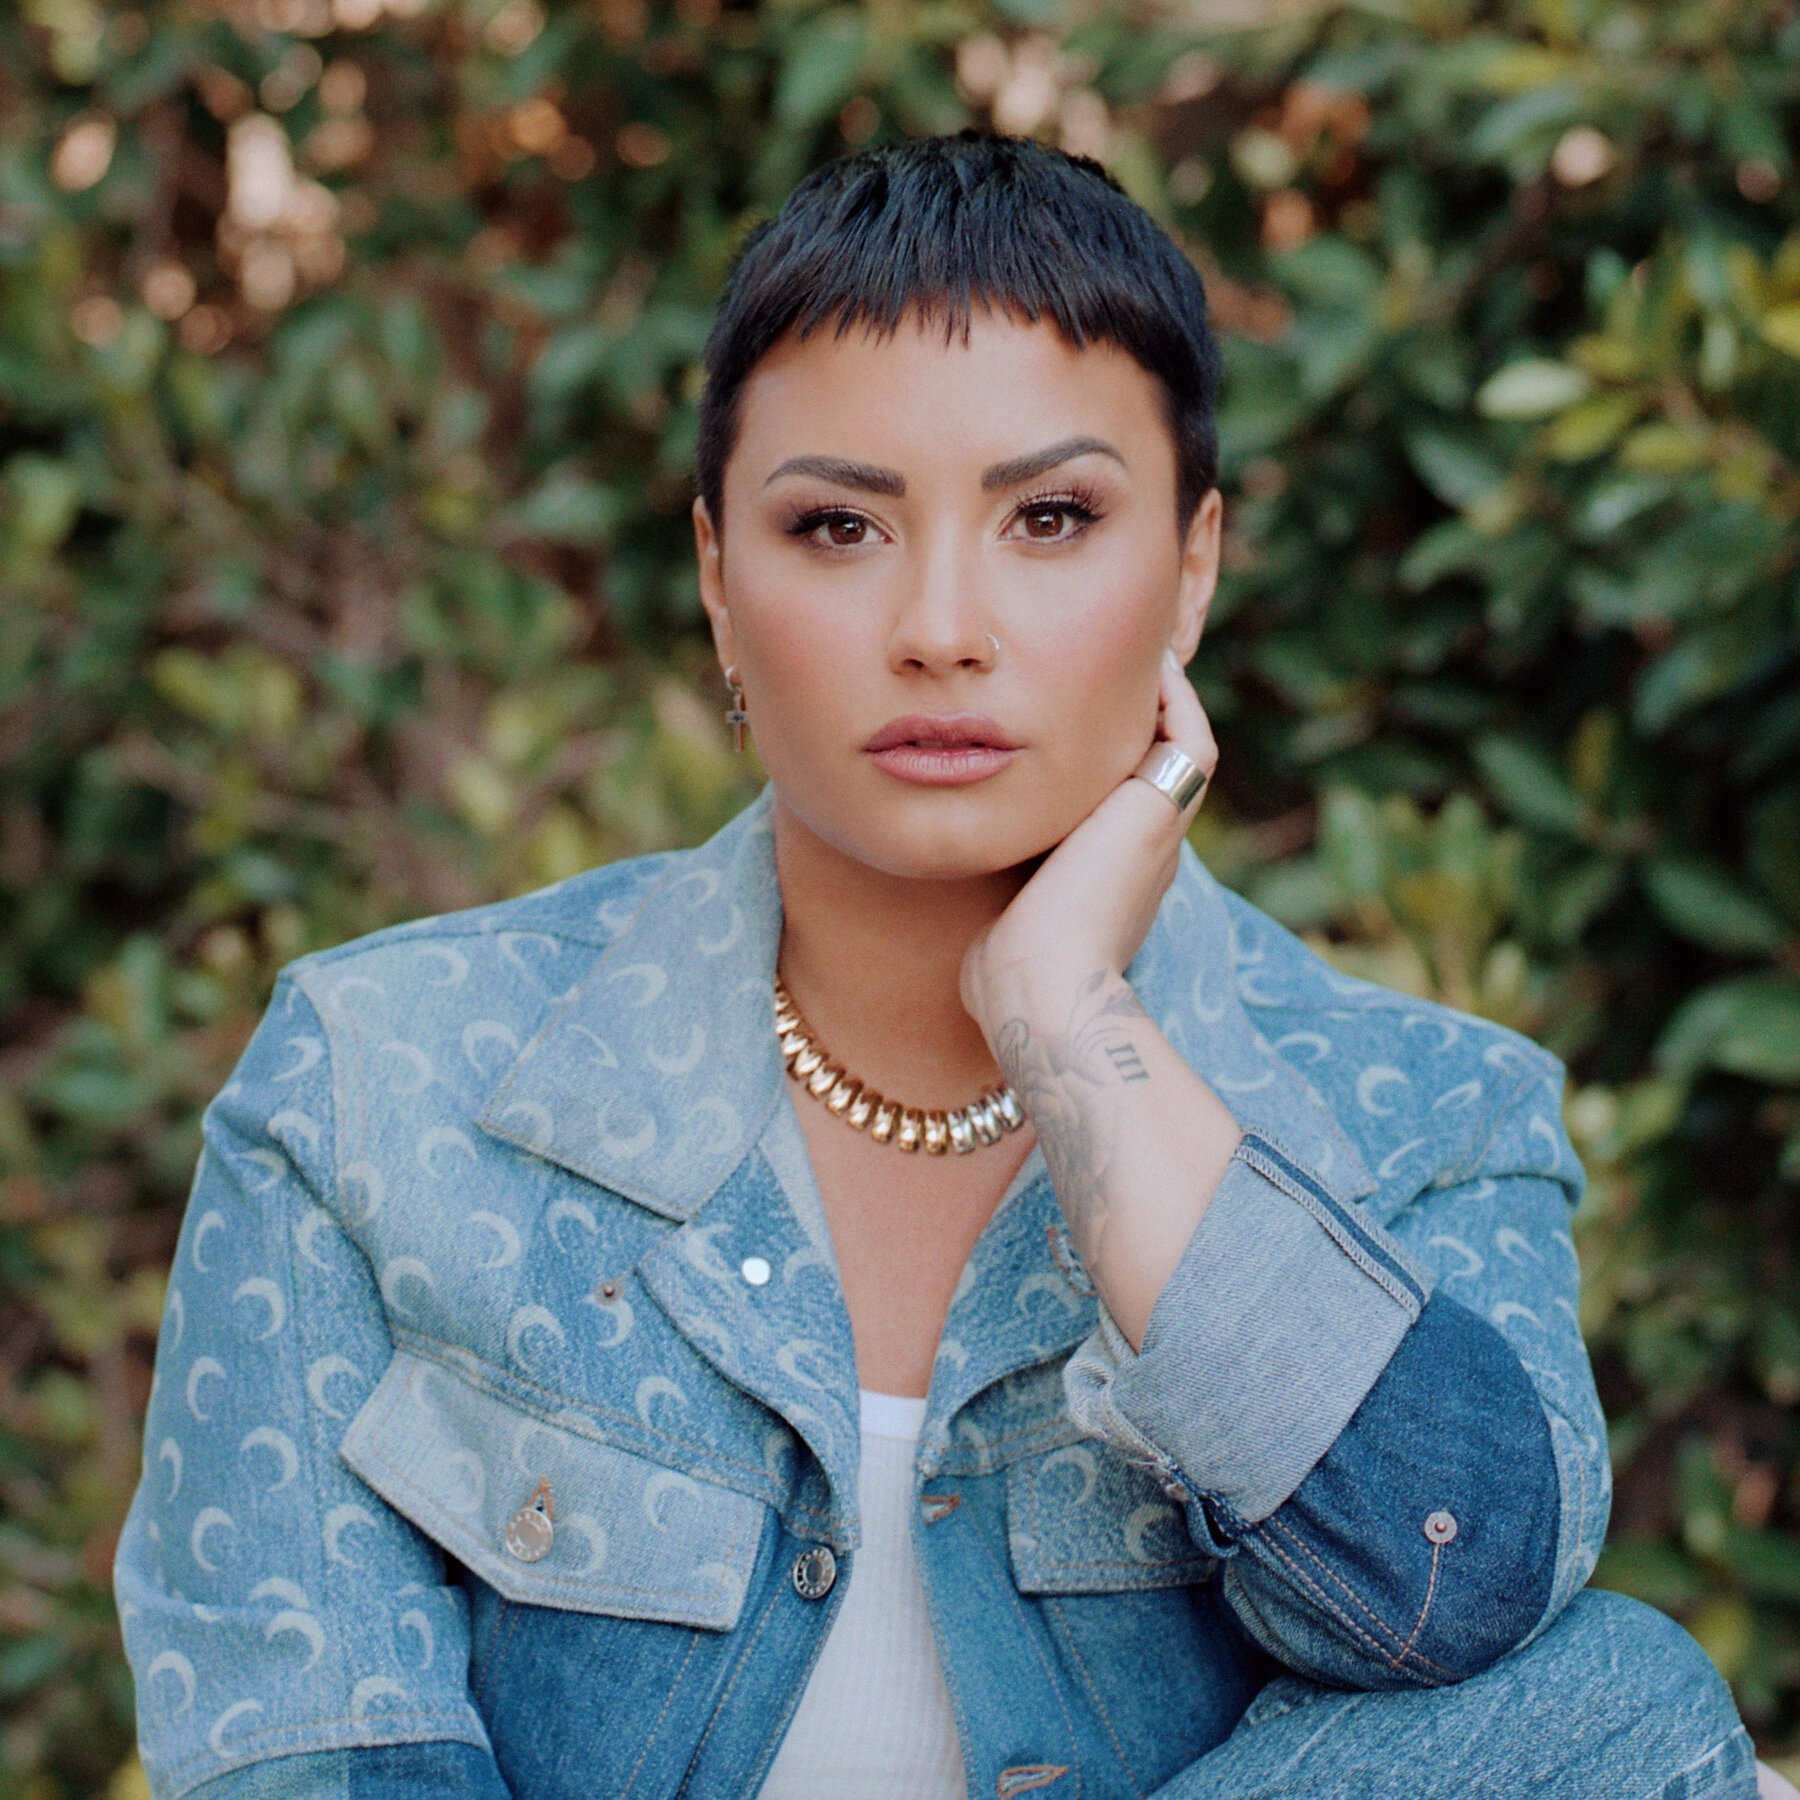 Who is Demi Lovato: Biography, Personal Life, Career, Coming Out As Non-Binary